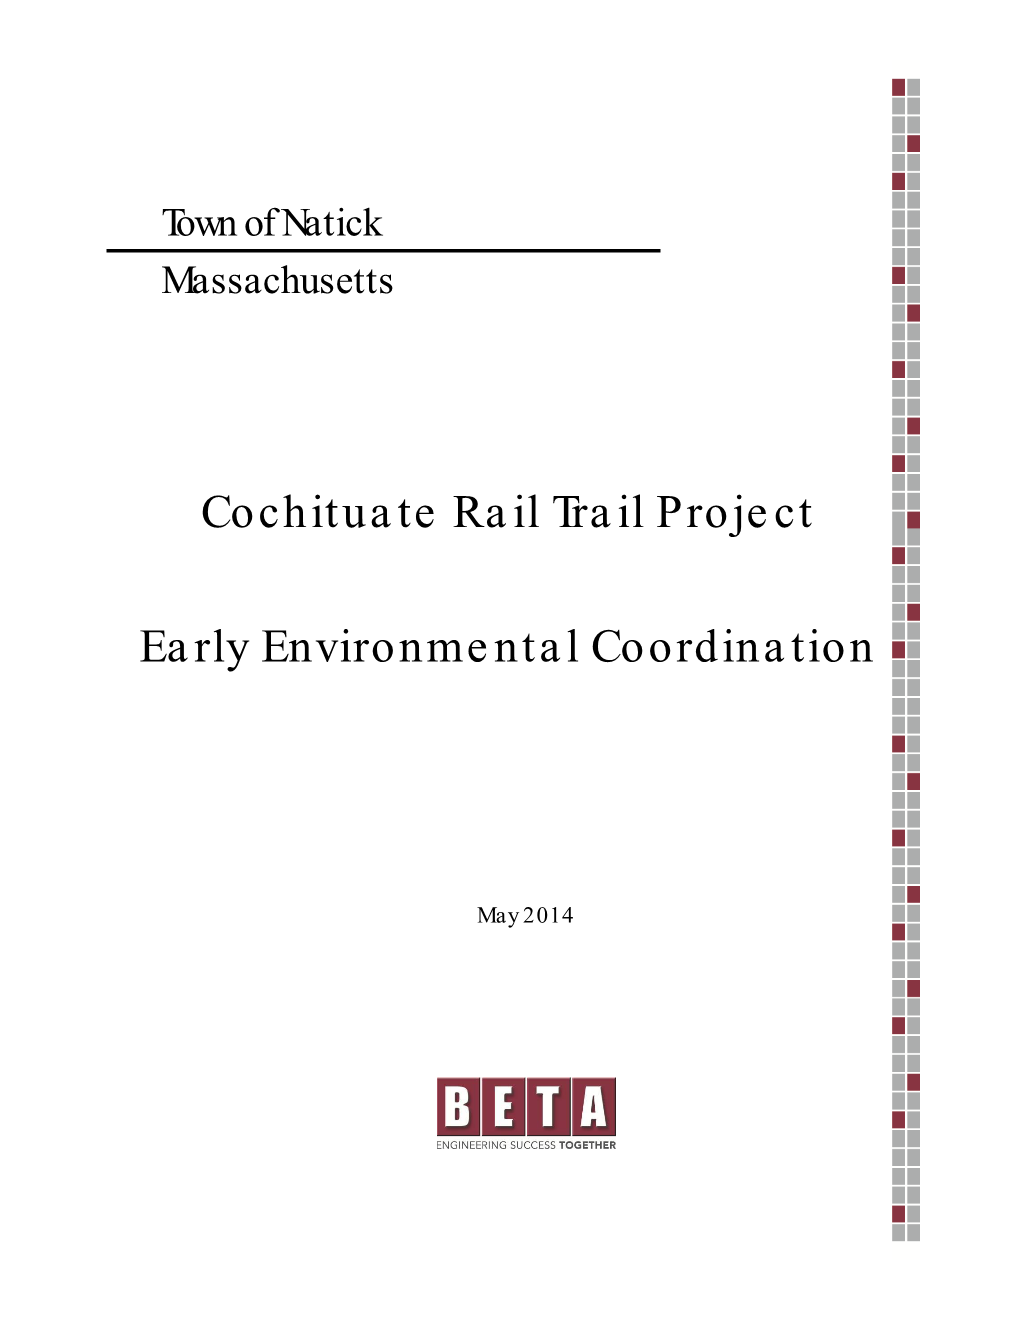 Cochituate Rail Trail Project Early Environmental Coordination